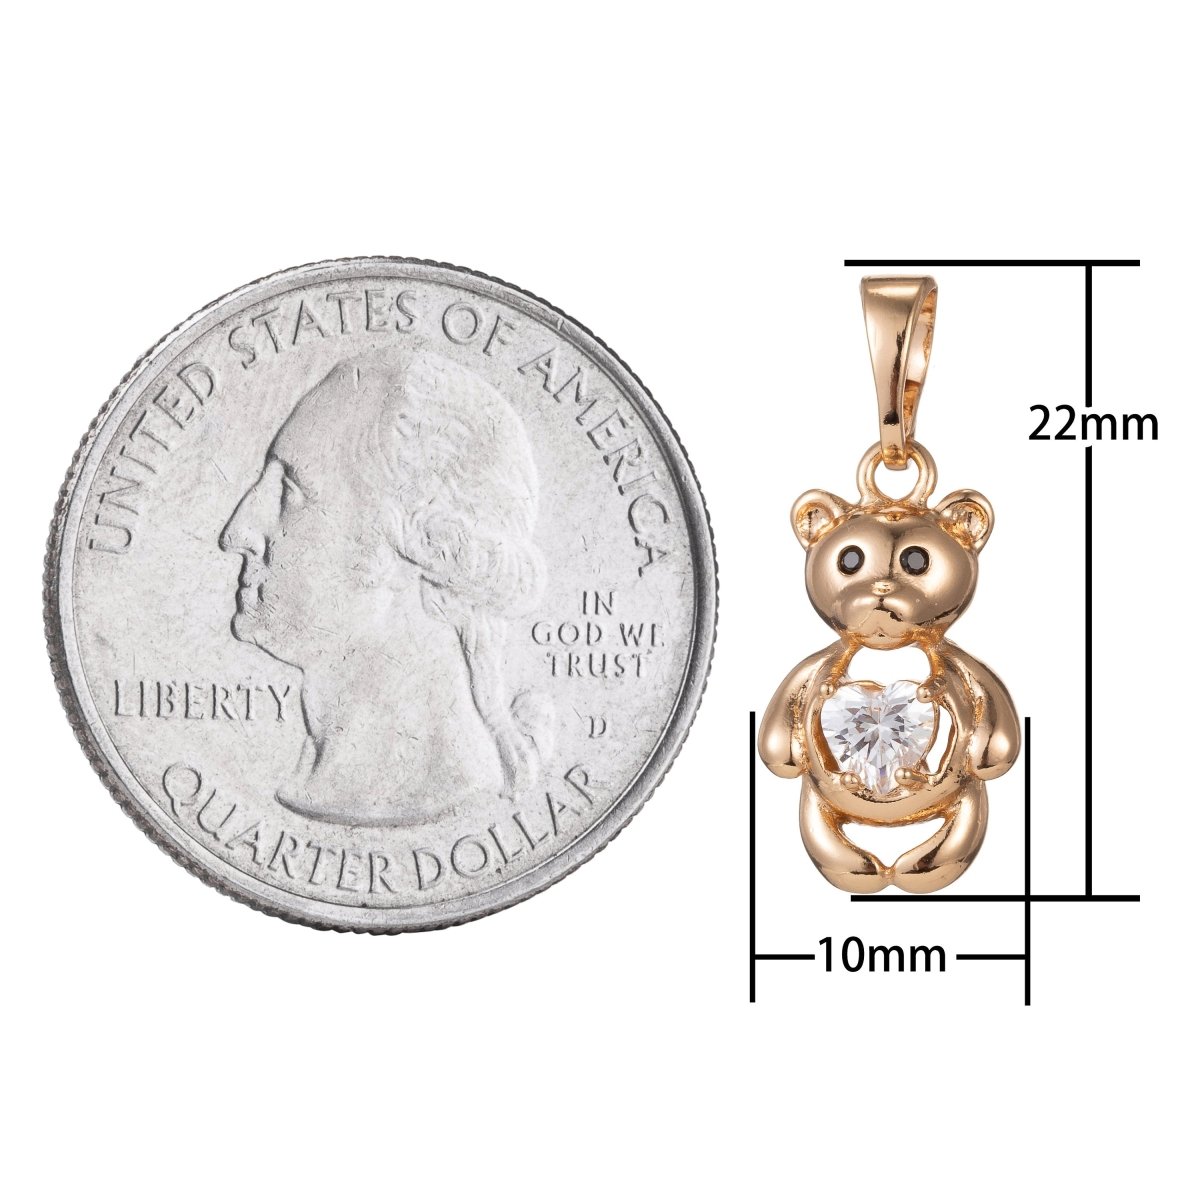 18k Gold Filled Micro Pave CZ Cutie Bear Pendant Charm, Micro Pave CZ Bear Pendant Charm, Gold Filled Animal Pendant, For DIY Jewelry I-524 - DLUXCA